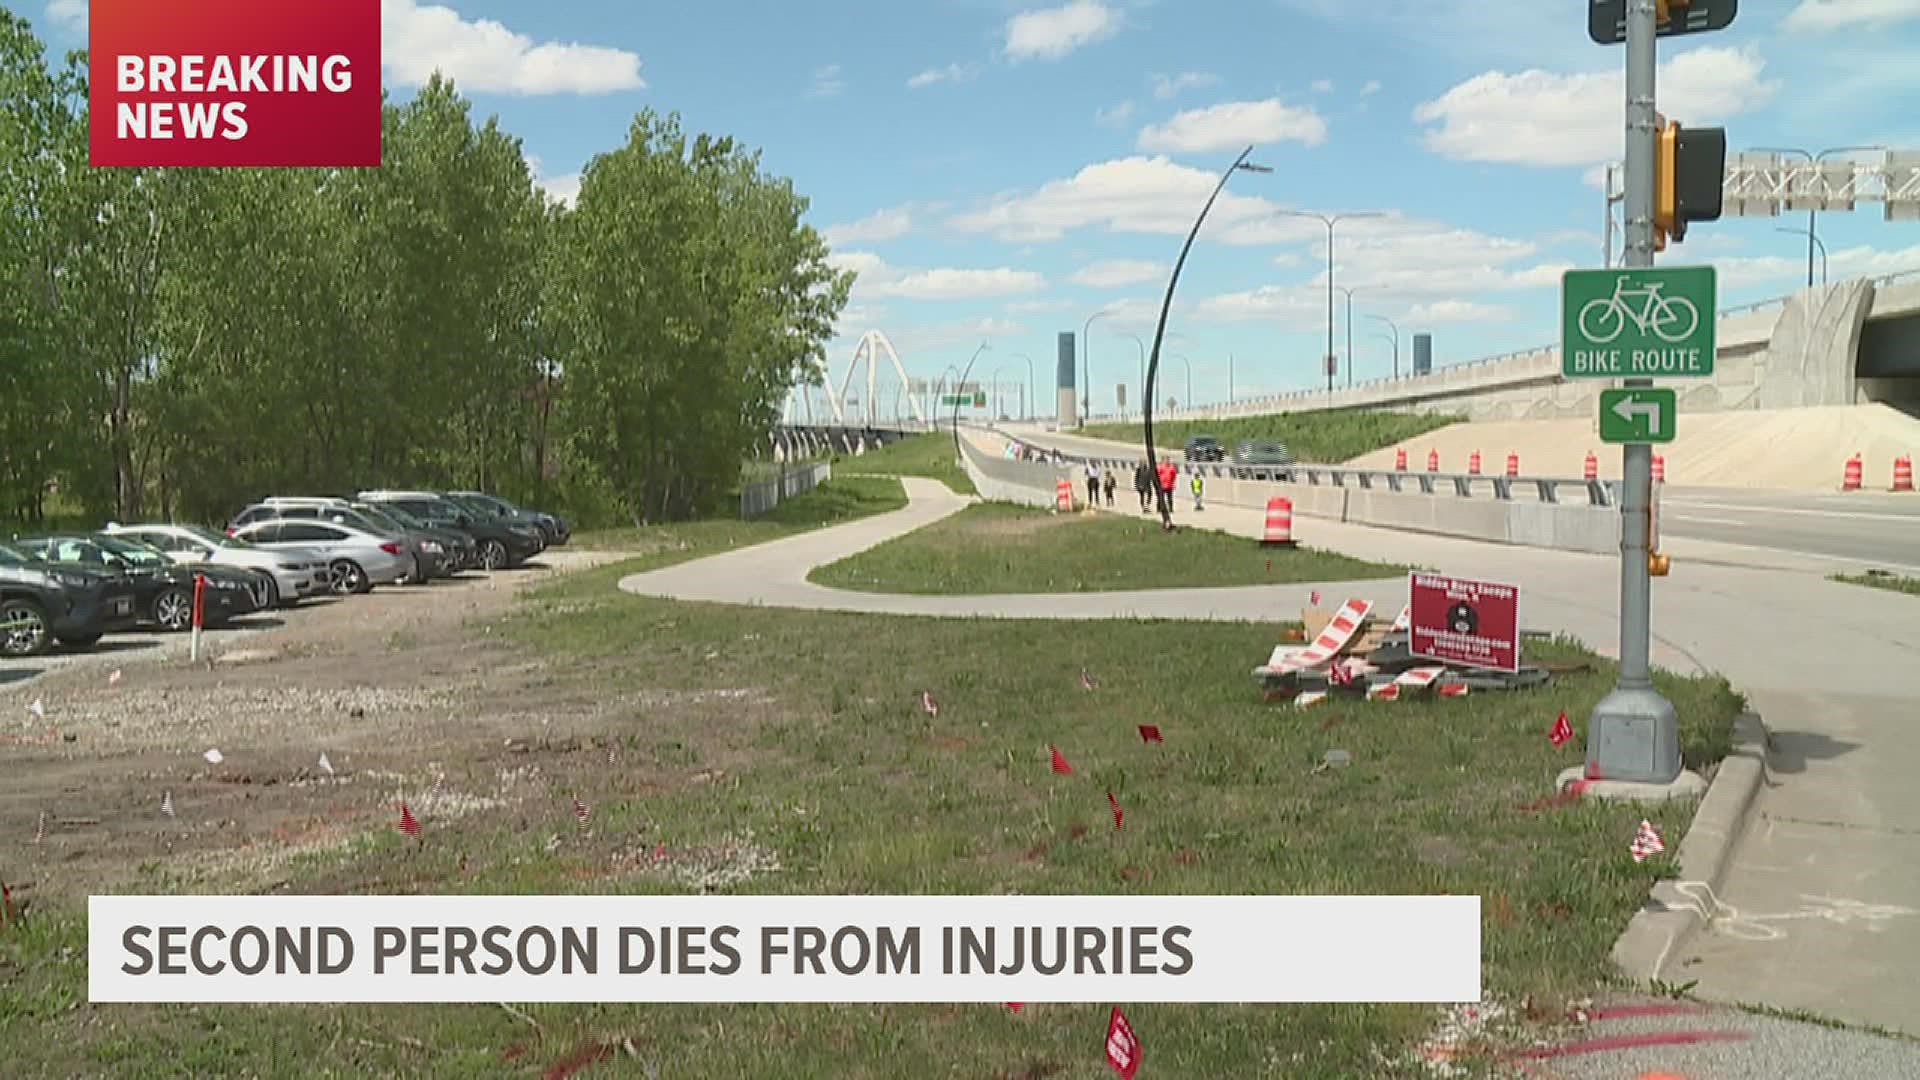 Anthony Castaneda is the second person to die as a result of injuries sustained in the May 22 incident on the I-74 bike and pedestrian path.